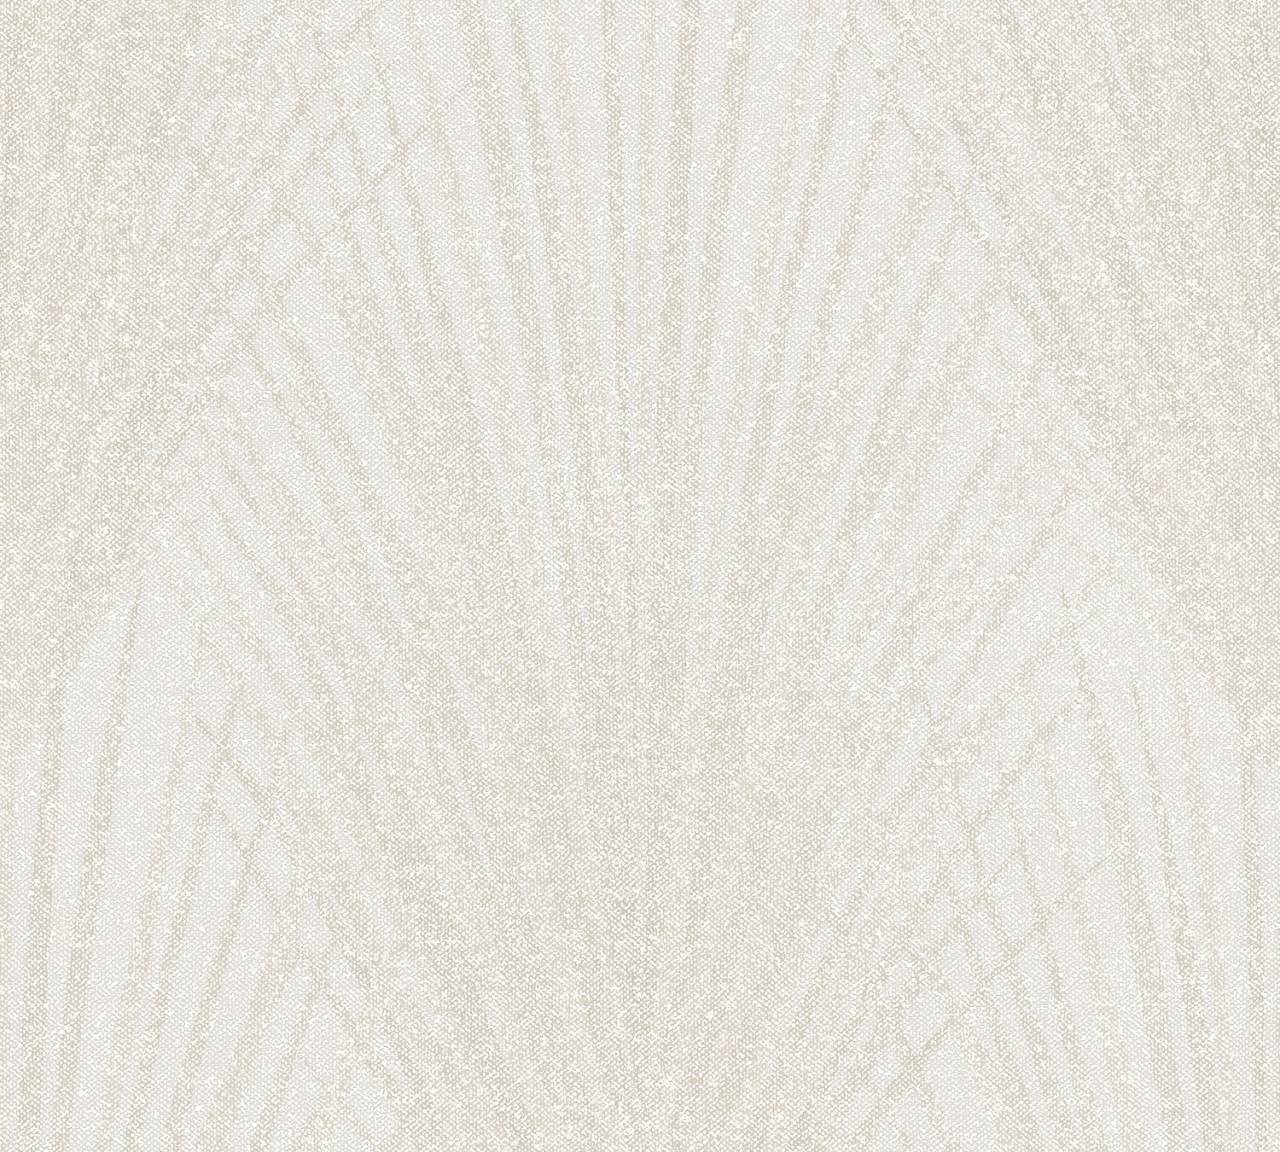 A.S. Creation As Non-Woven Wallpaper Beige / Cream Floral New Elegance 375532